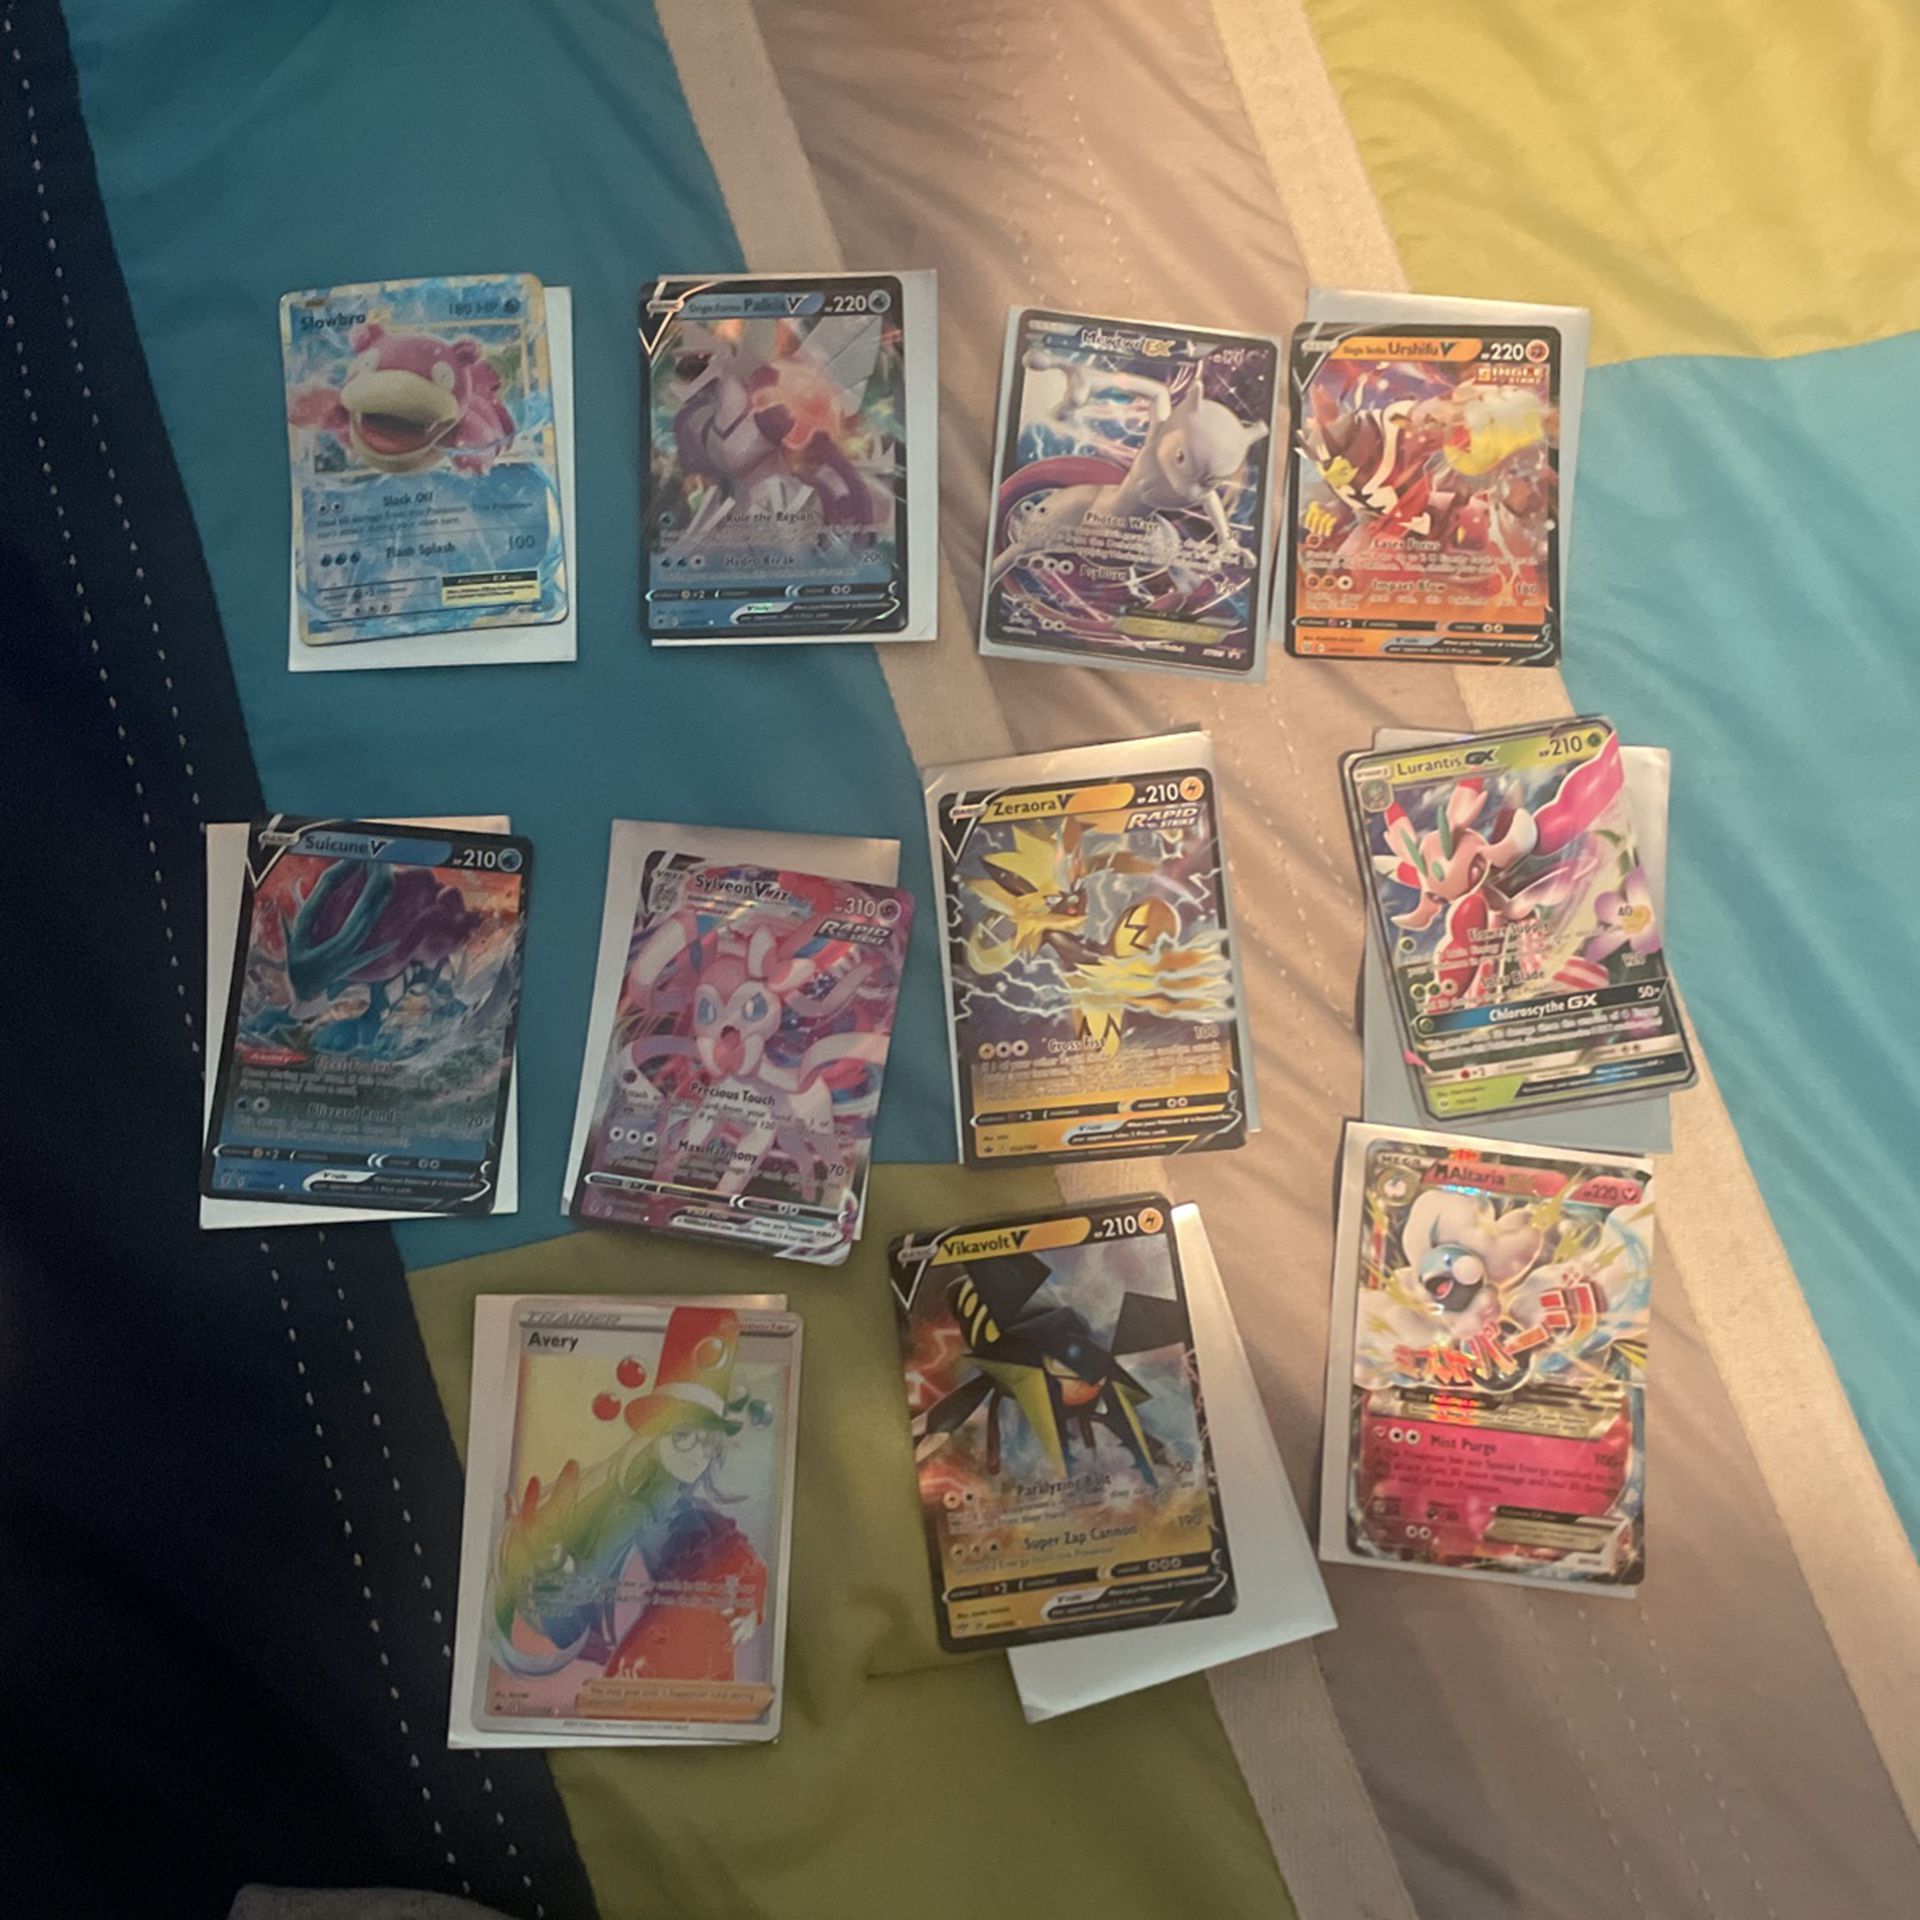 POKÉMON CARDS ALL FOR 20 REAL